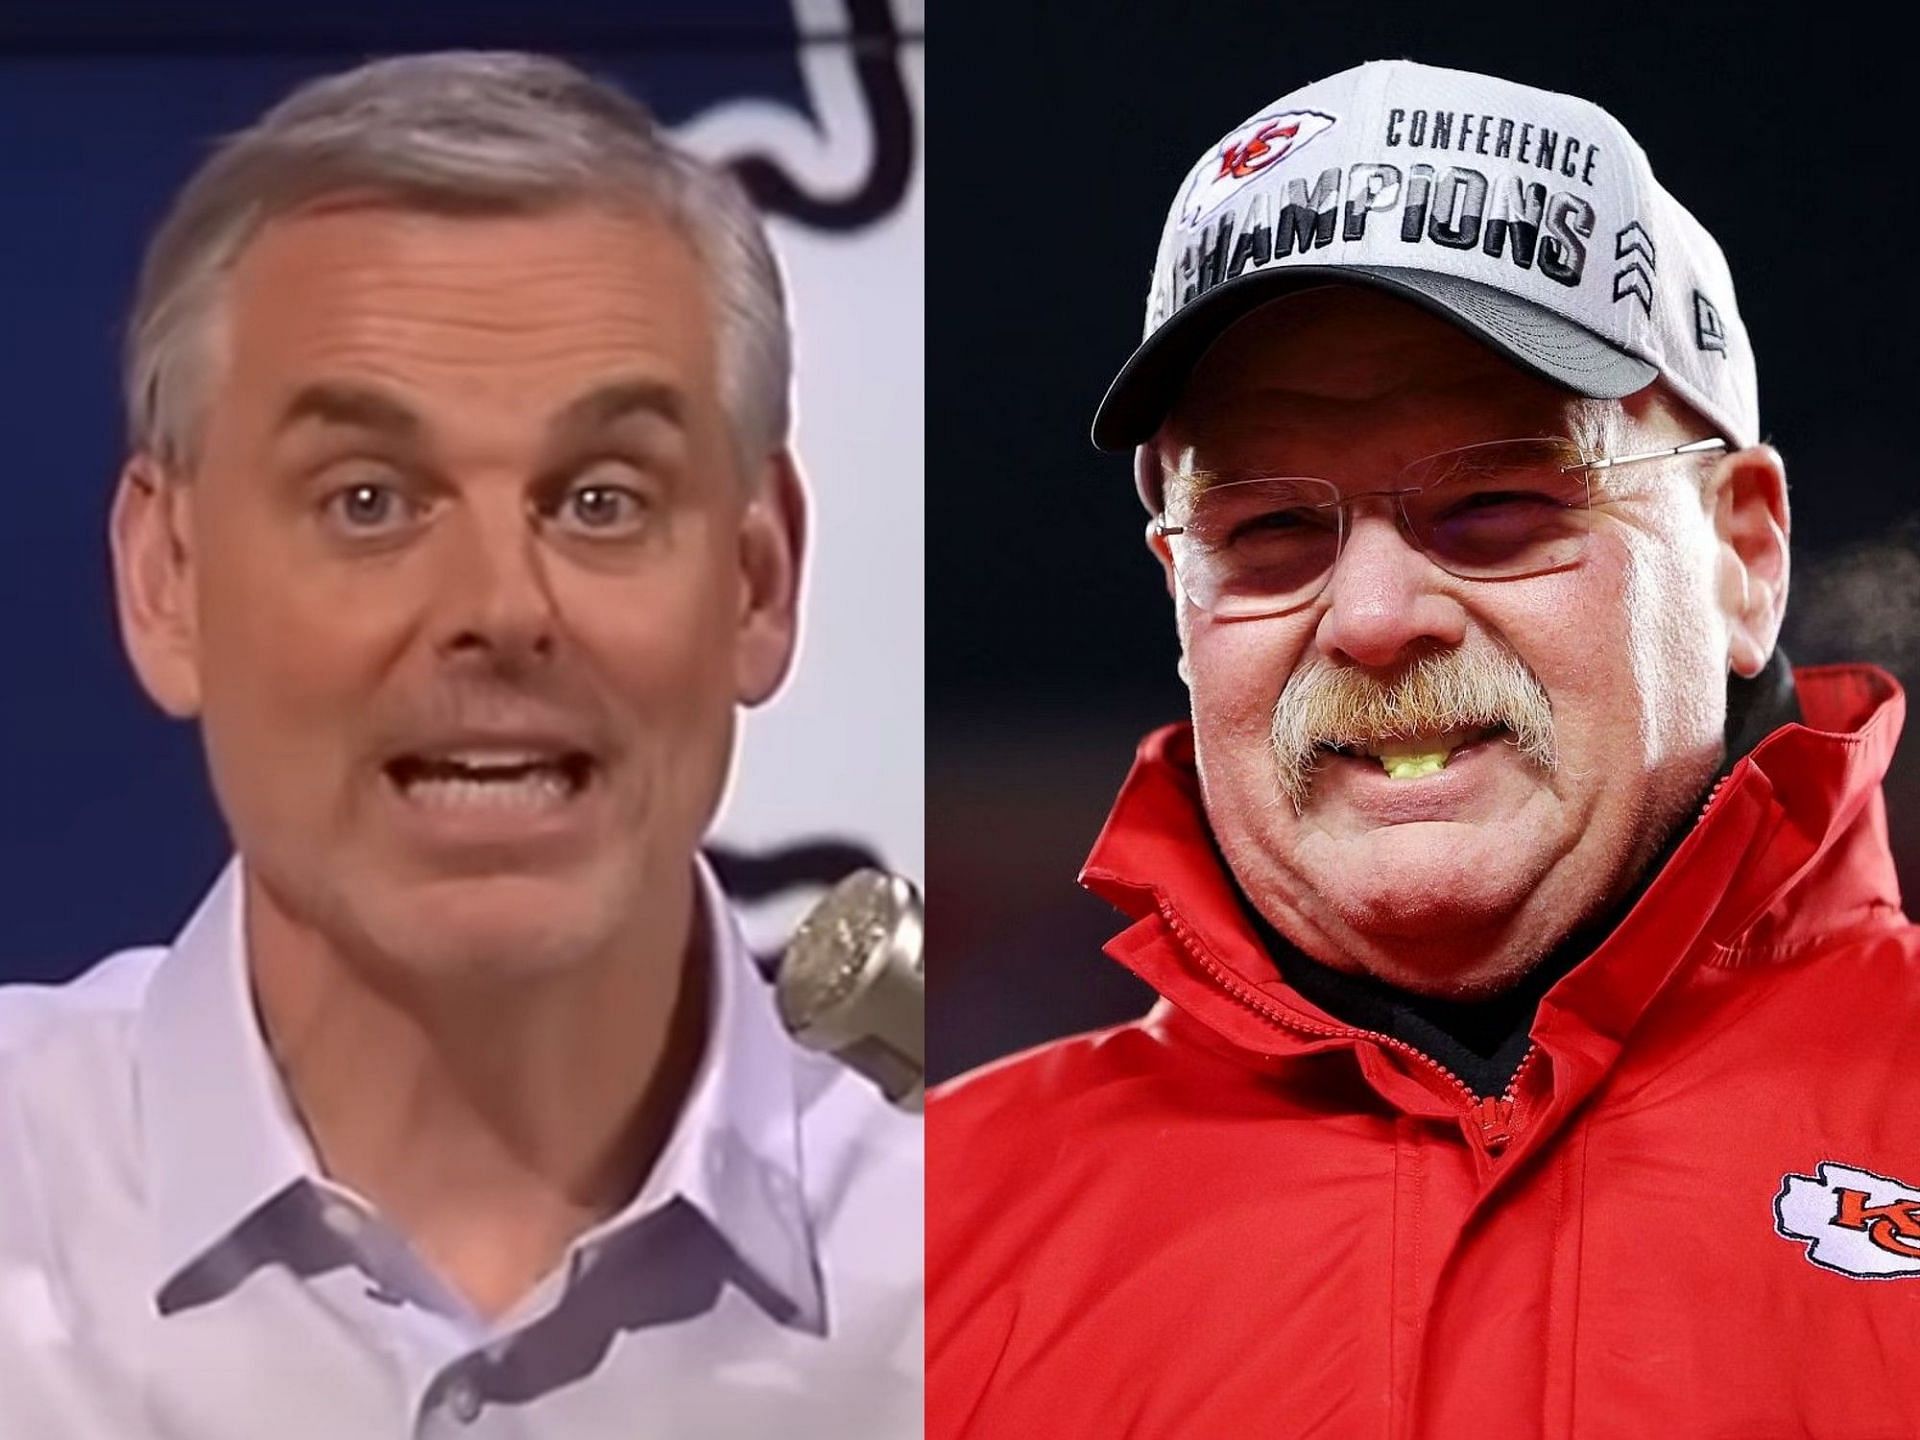 Andy Reid rumored to be flirting with retirement, claims Colin Cowherd - Courtesy of the Herd with Colin Cowherd on YouTube